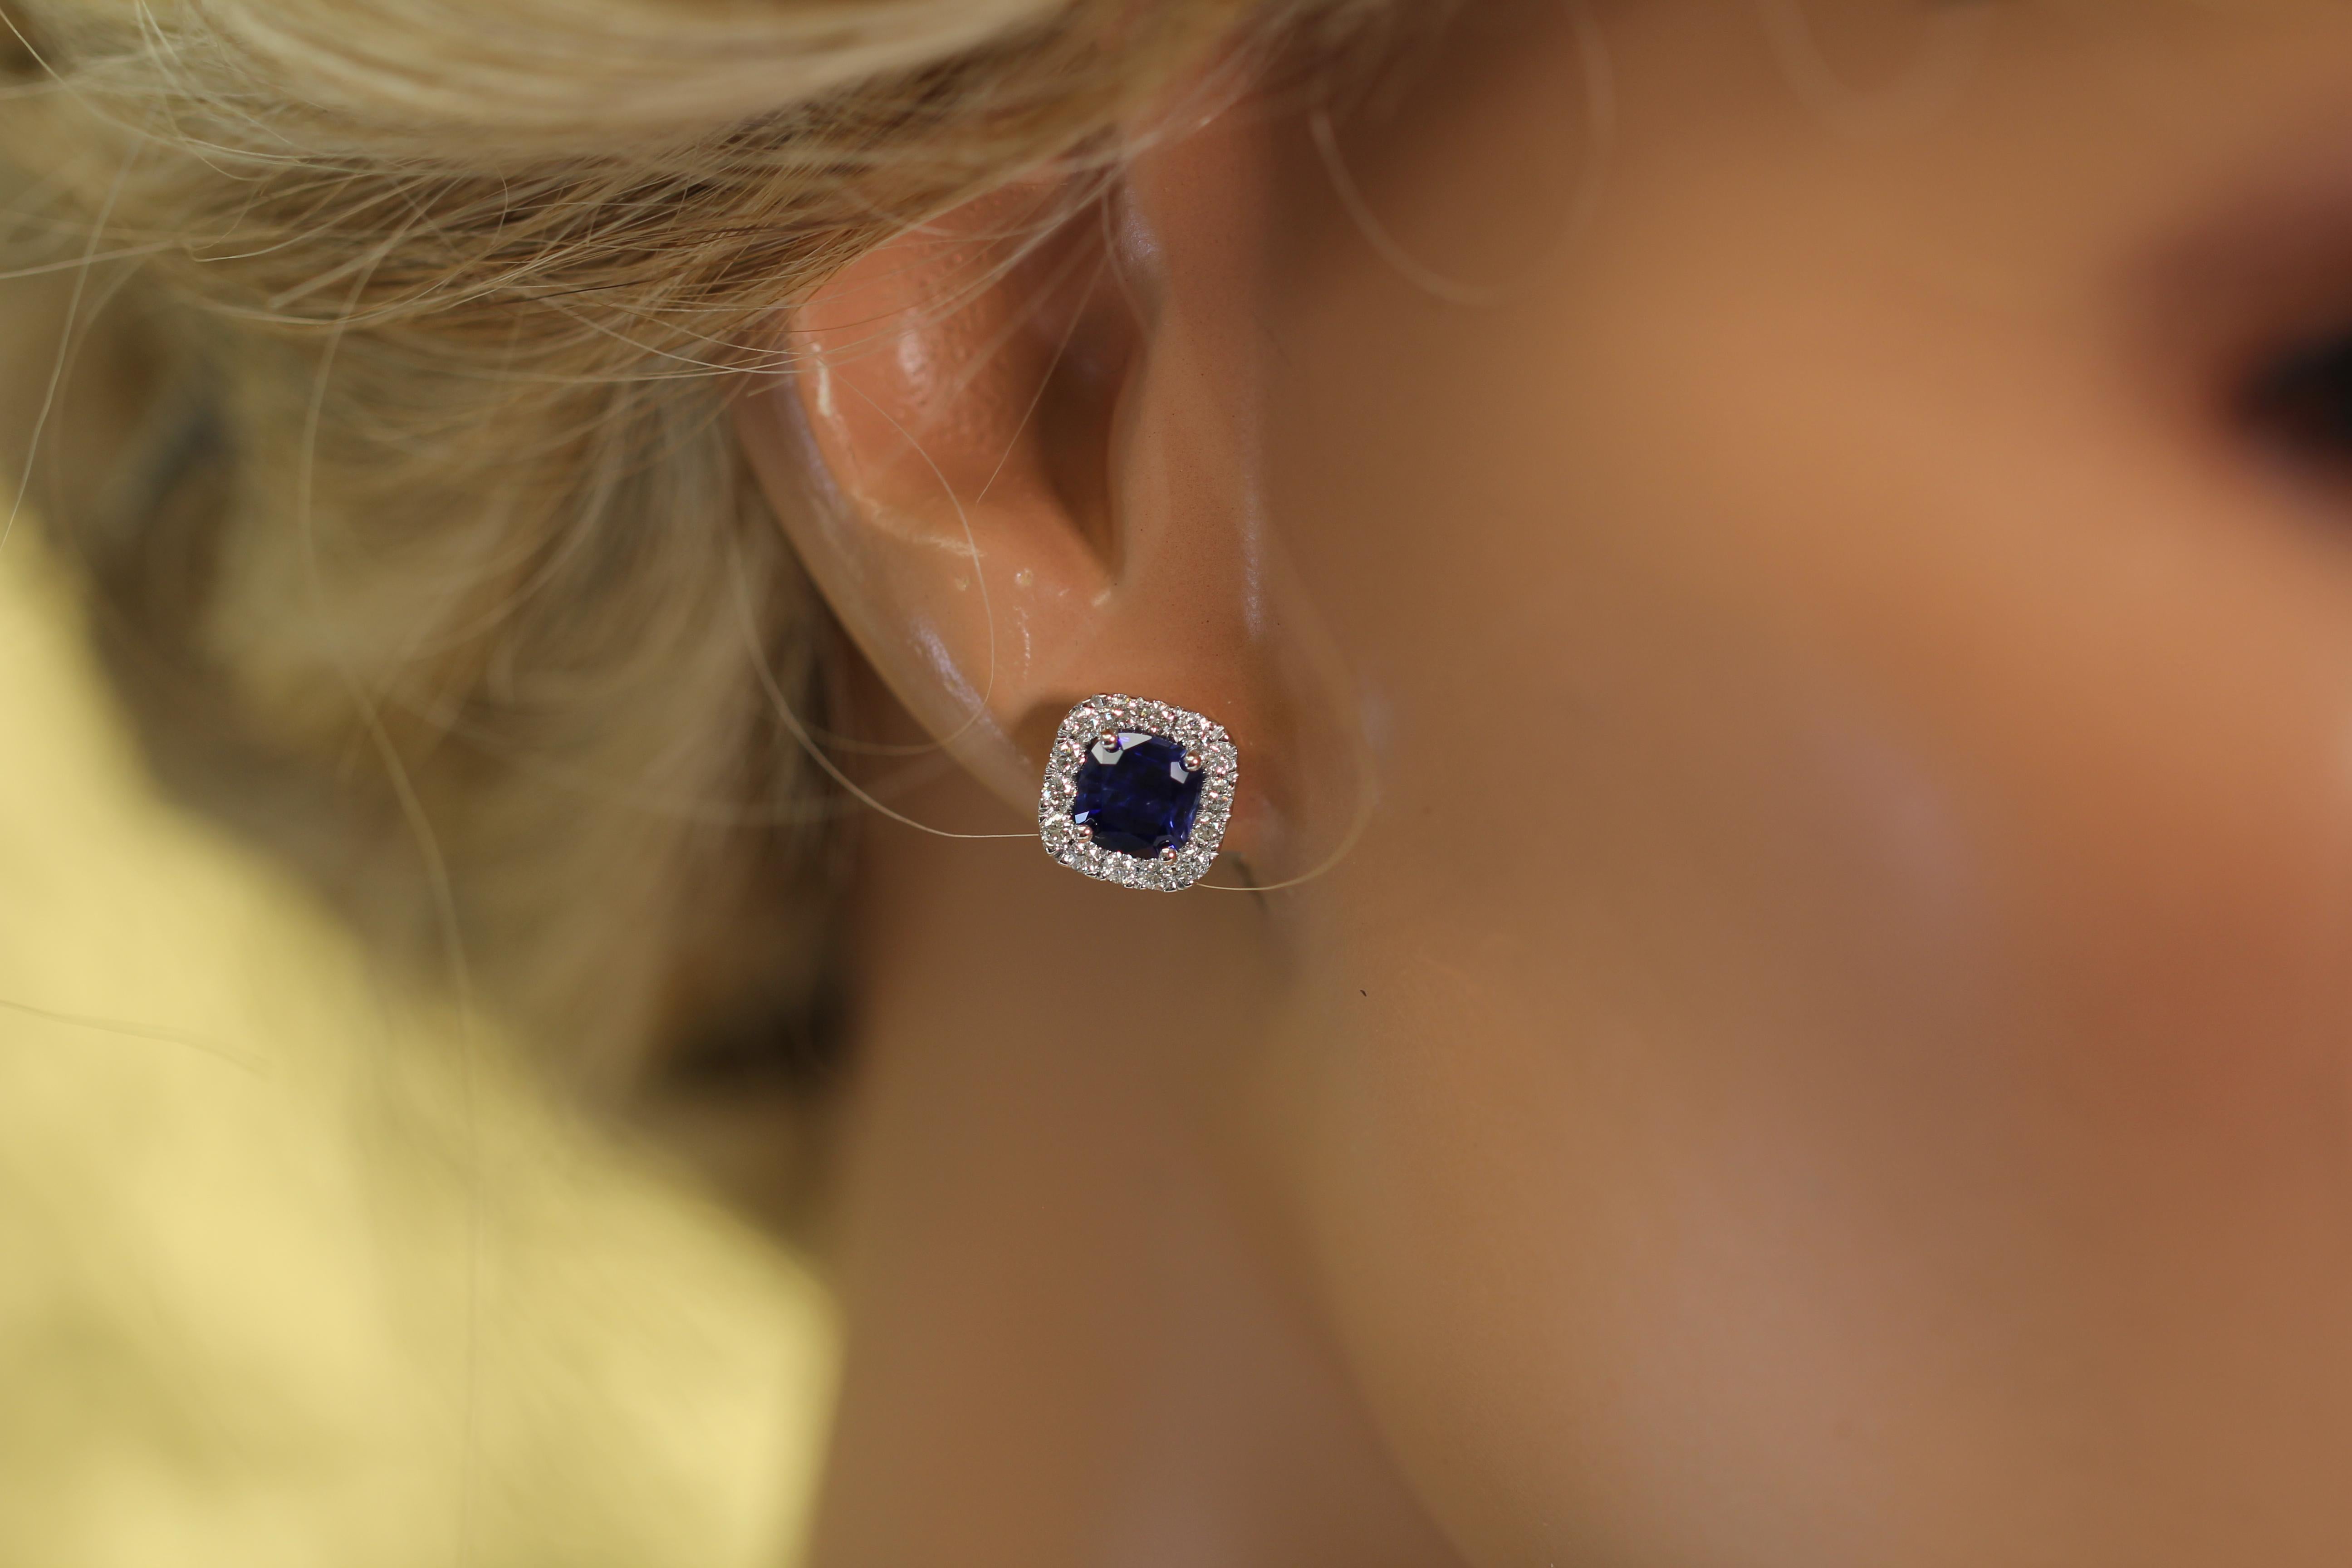 Admire these exquisite halo stud earrings boasting a combined total of 1.95 carats of Cushion cut sapphires and 0.52 carats of diamonds. This timeless piece is a perfect choice and an ideal gift!

At DiamondTown, we take immense pride in presenting